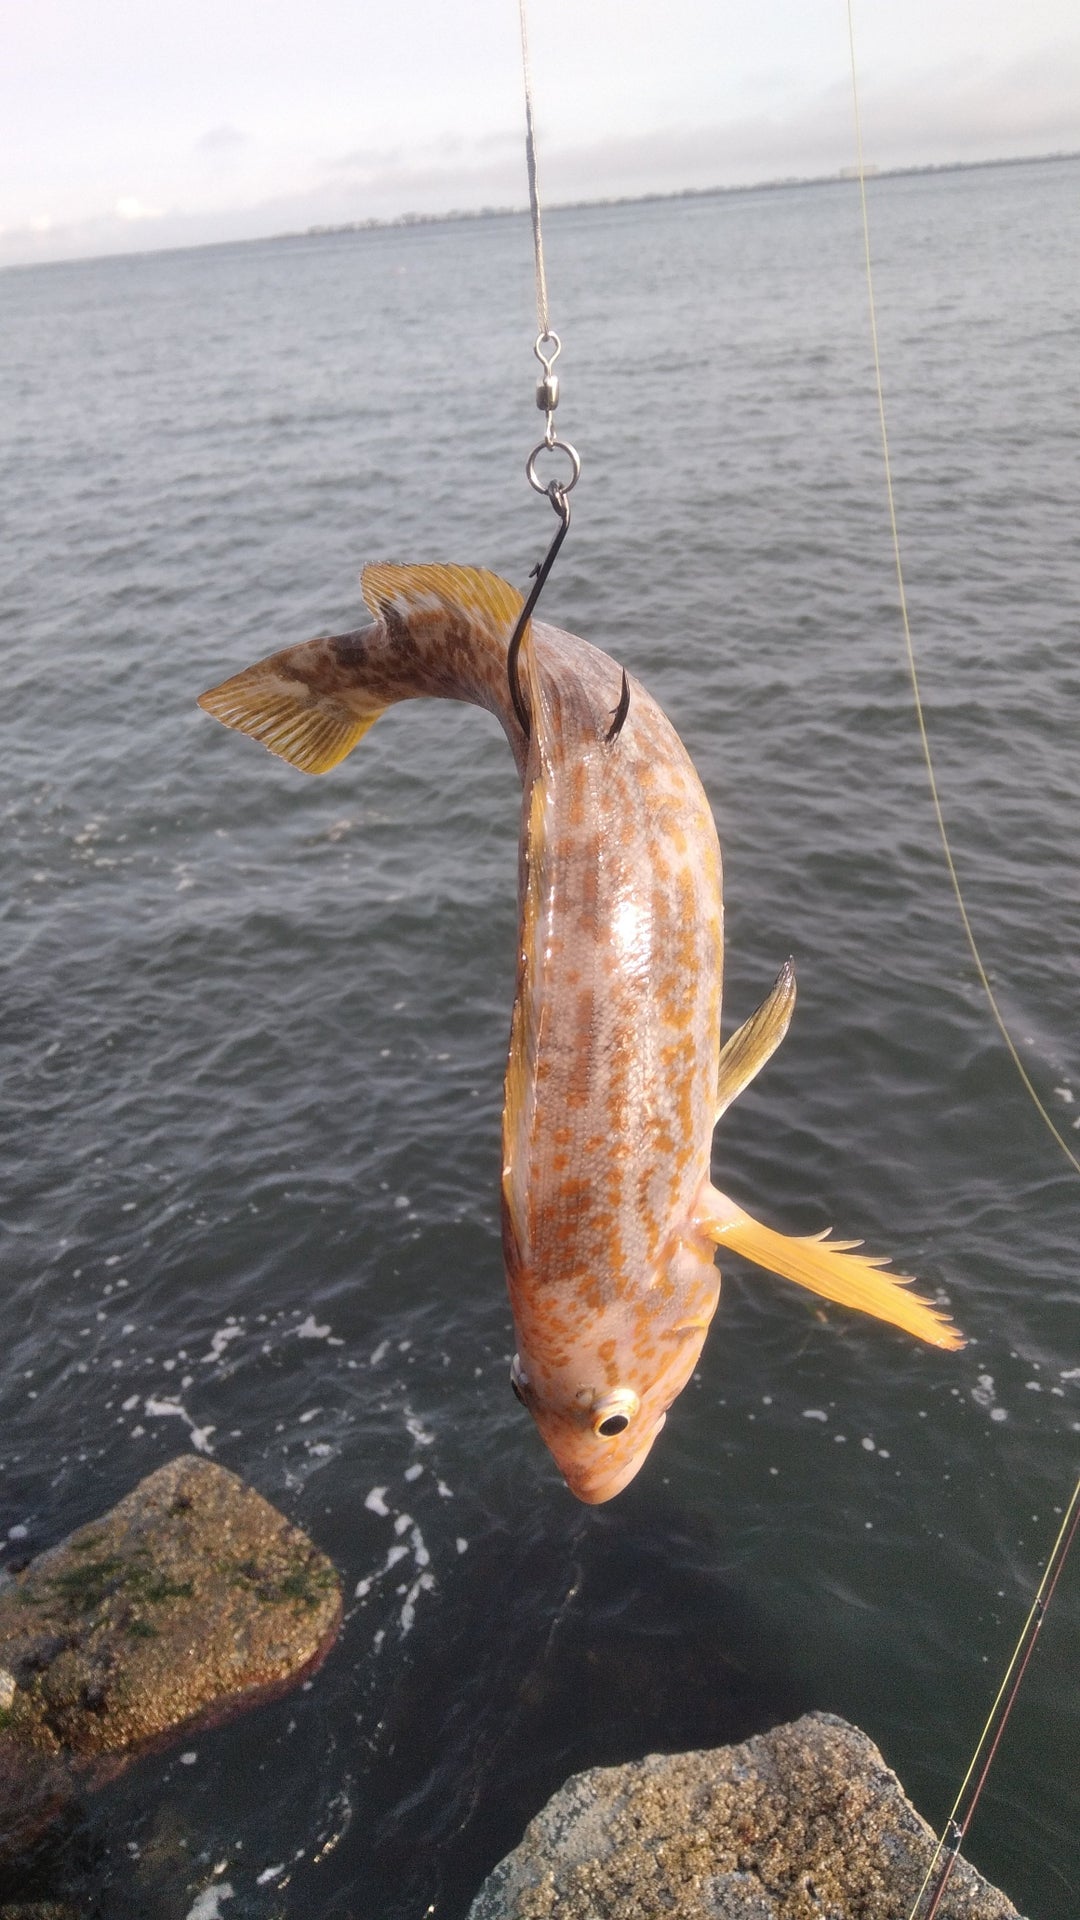 Fishing a live bait (greenling/rockfish/perch) for a lingcod on the jetty,  need tips on rigging a live bait.